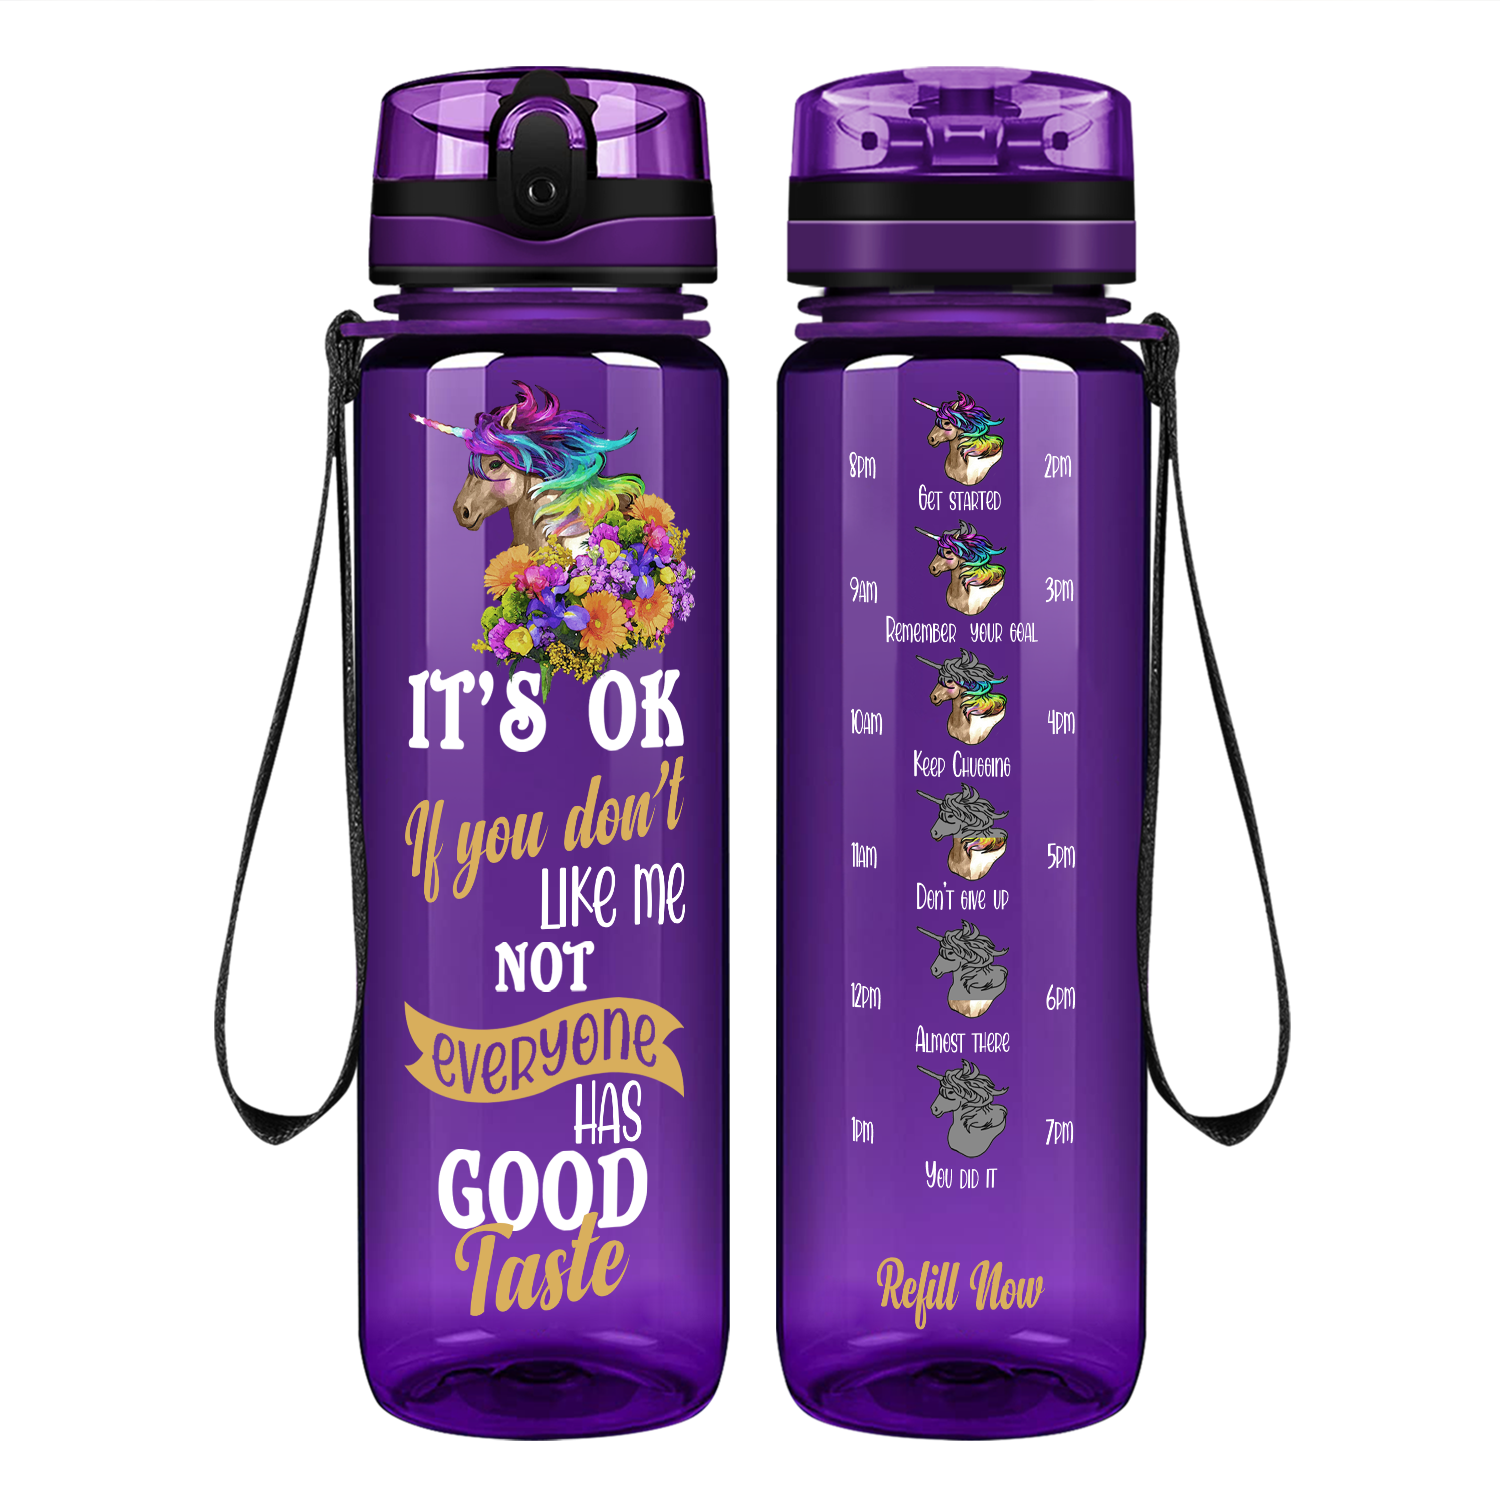 It's Ok If You Don't Like Me Not Everyone Has Good Taste on 32 oz Motivational Tracking Water Bottle